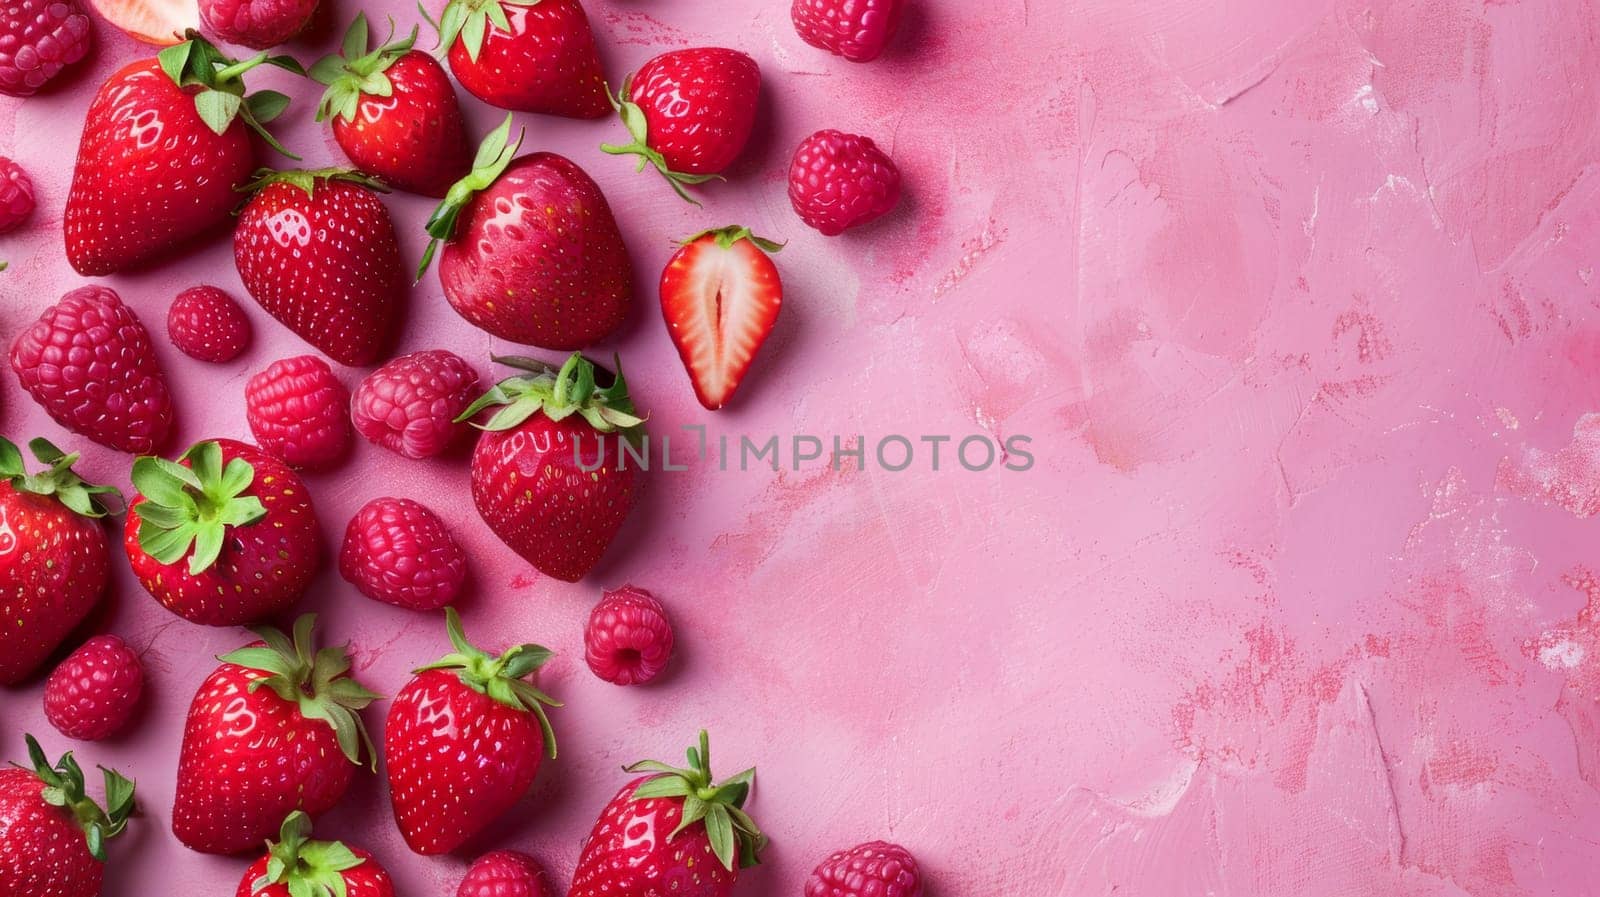 A bunch of strawberries and raspberries on a pink background